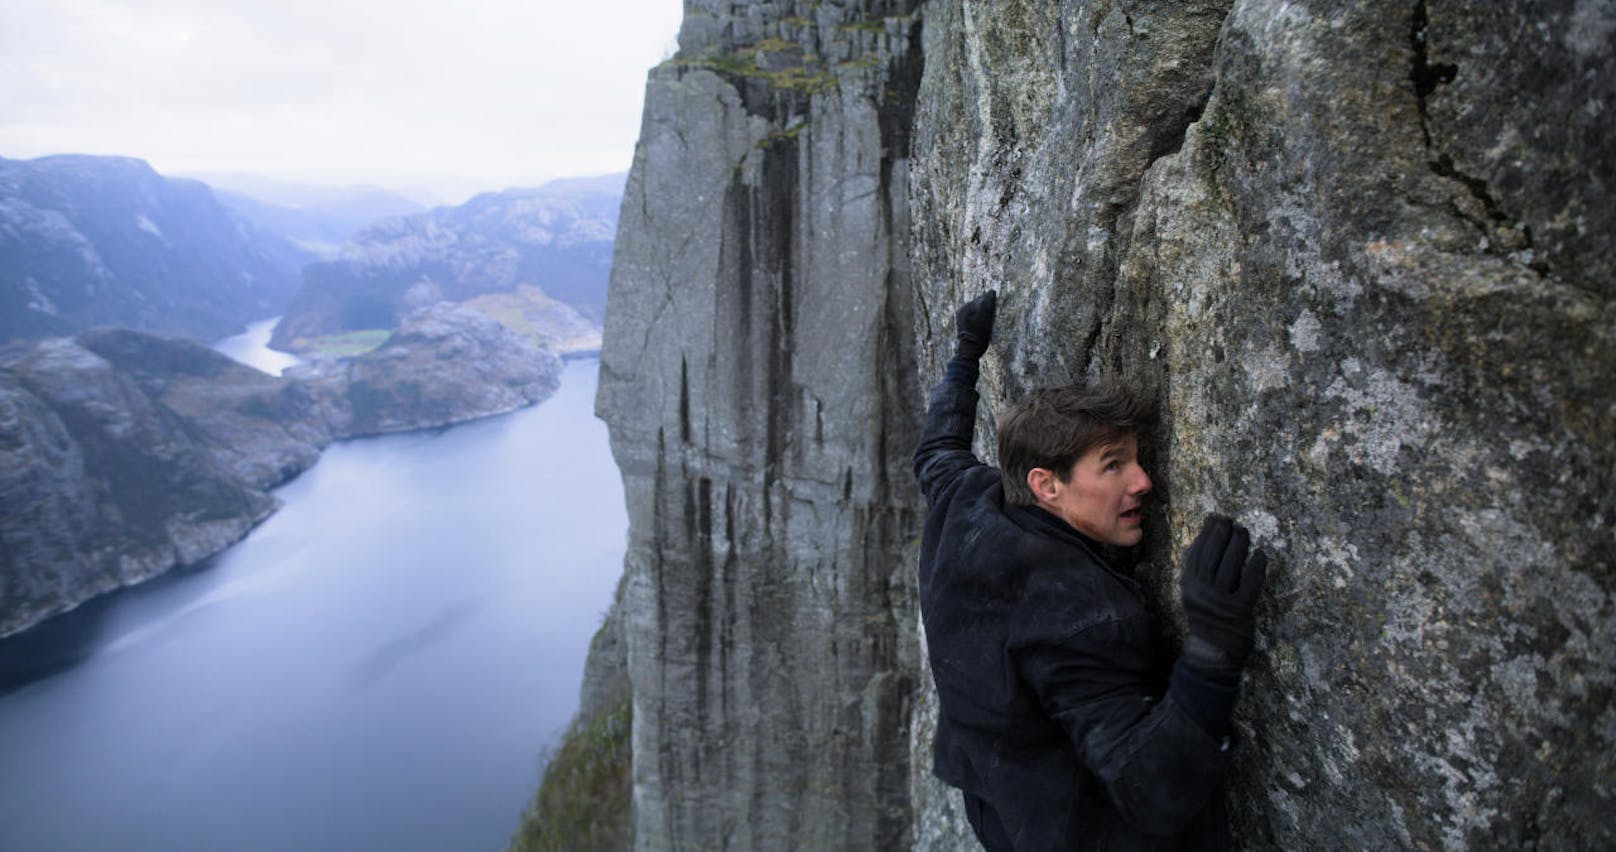 Tom Cruise als Ethan Hunt in "Mission: Impossible - Fallout"